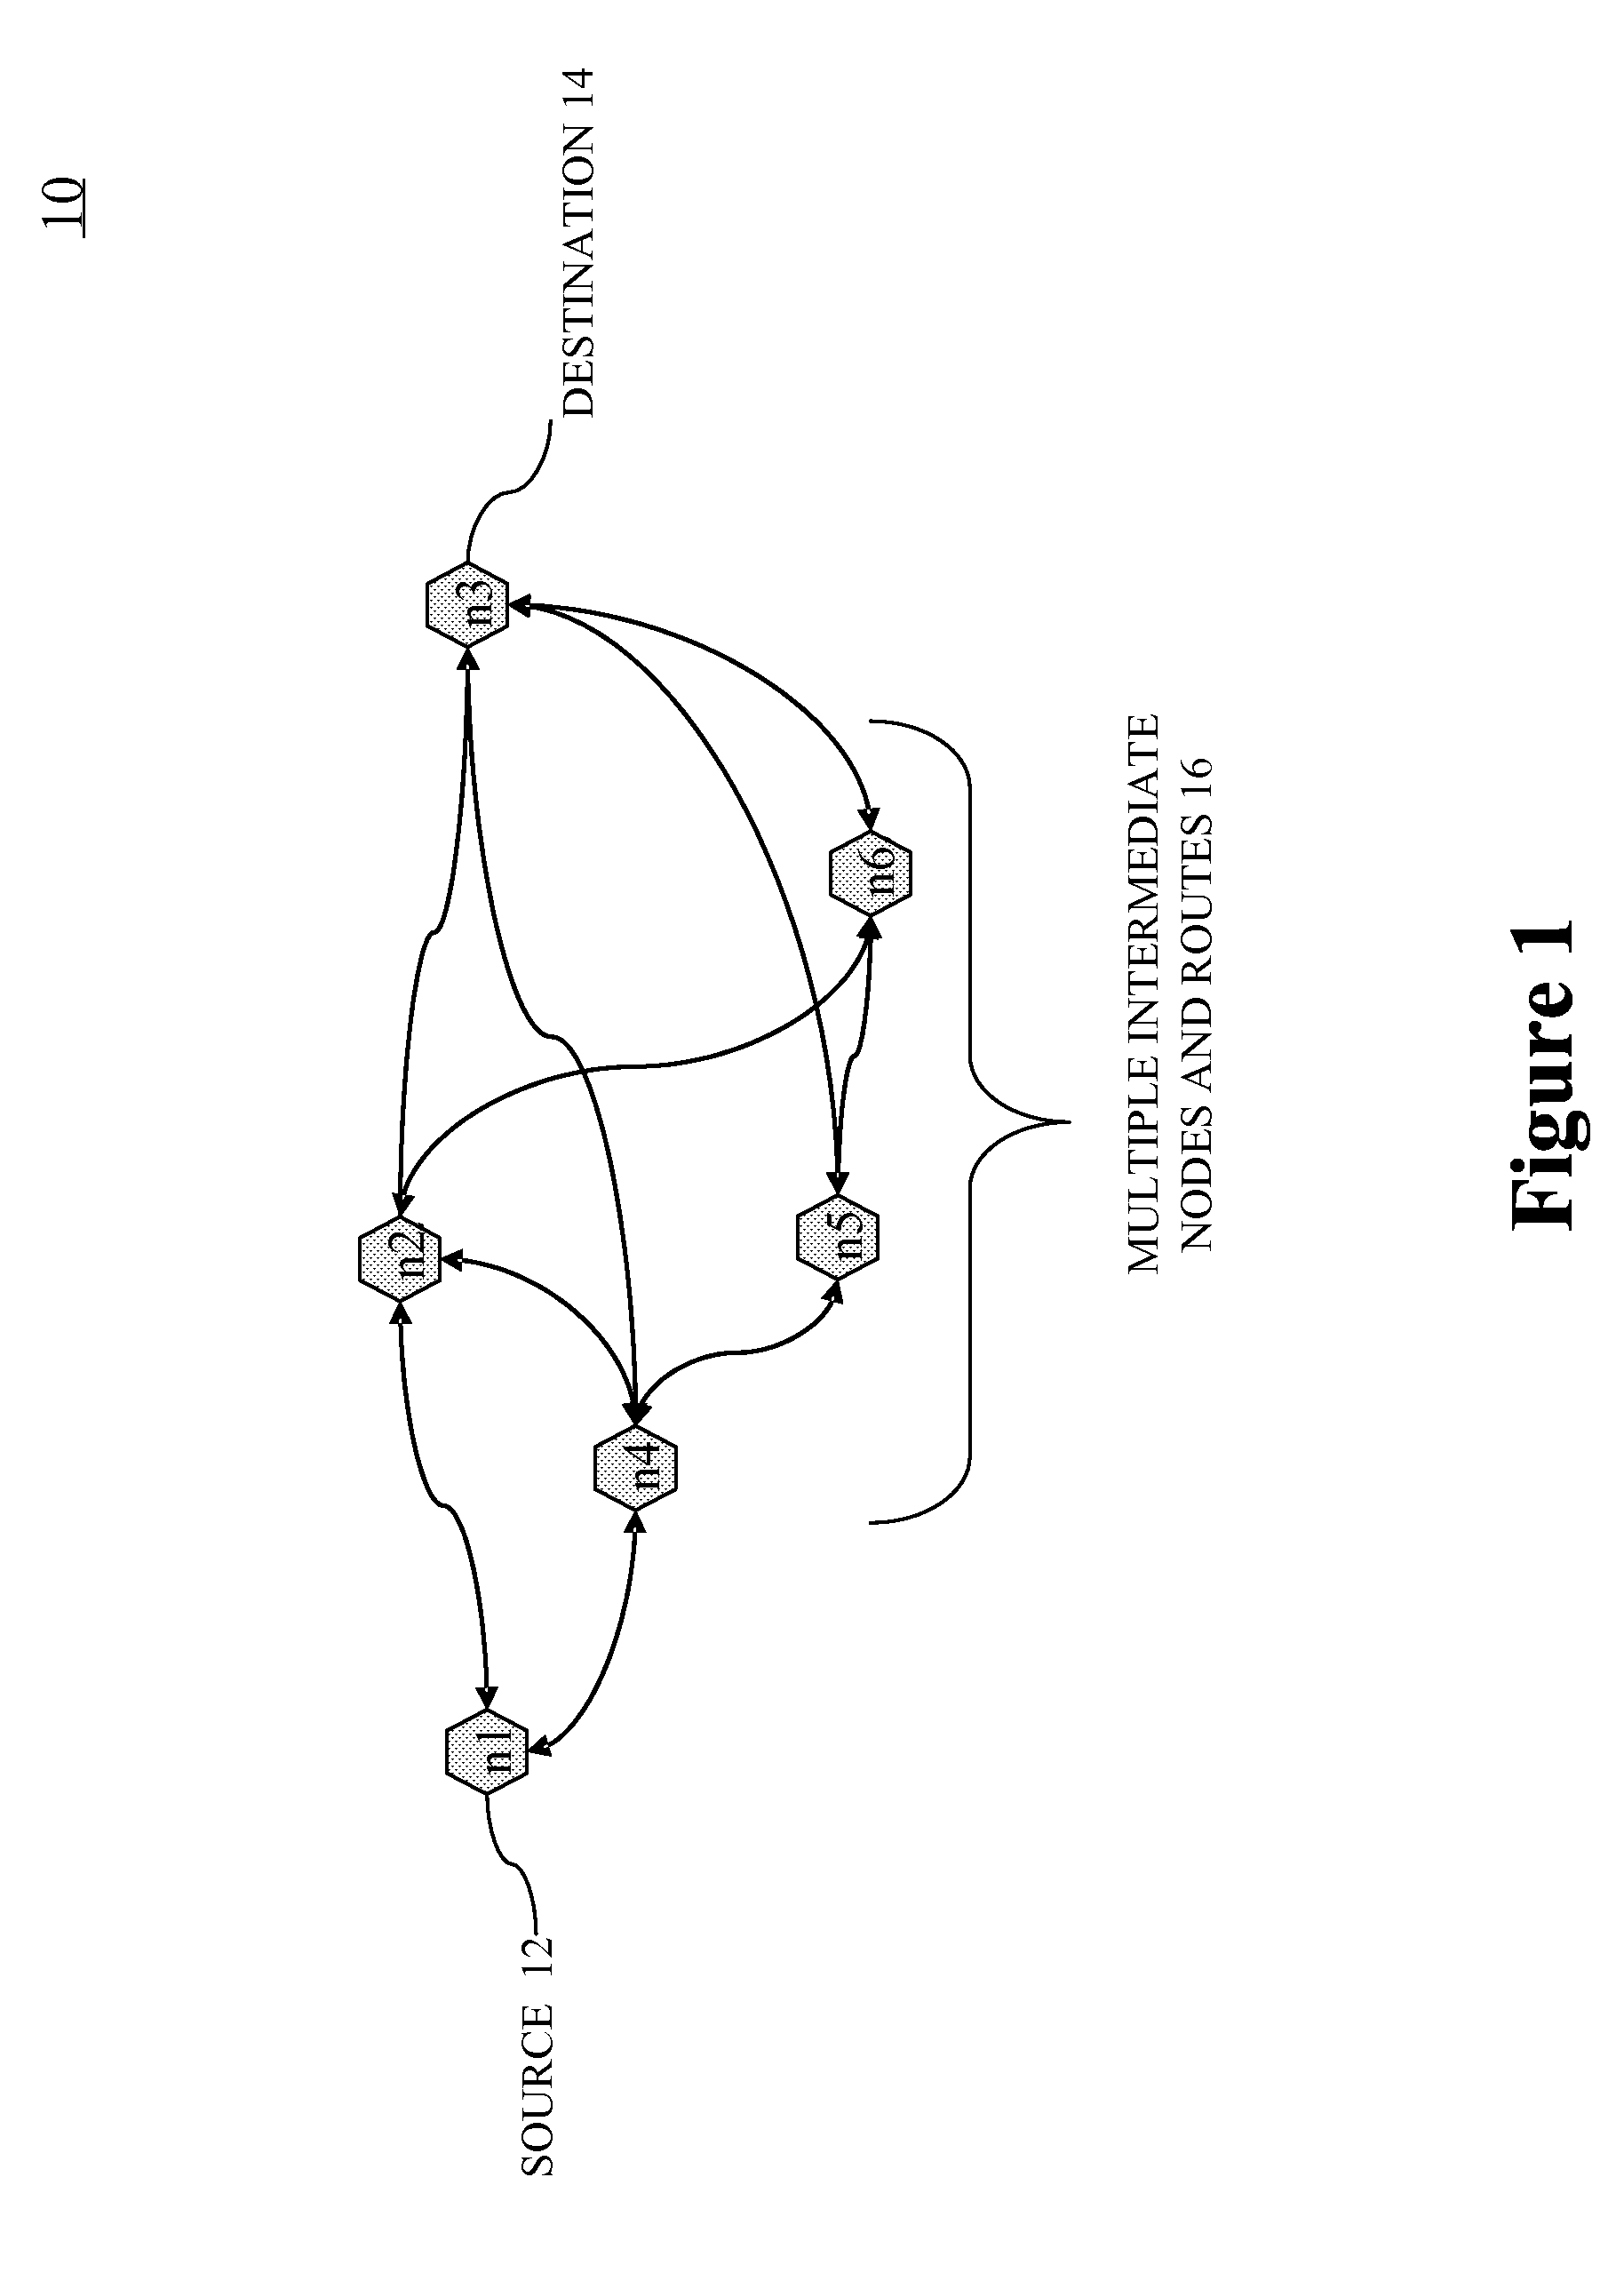 Communication Network with Skew Compensation